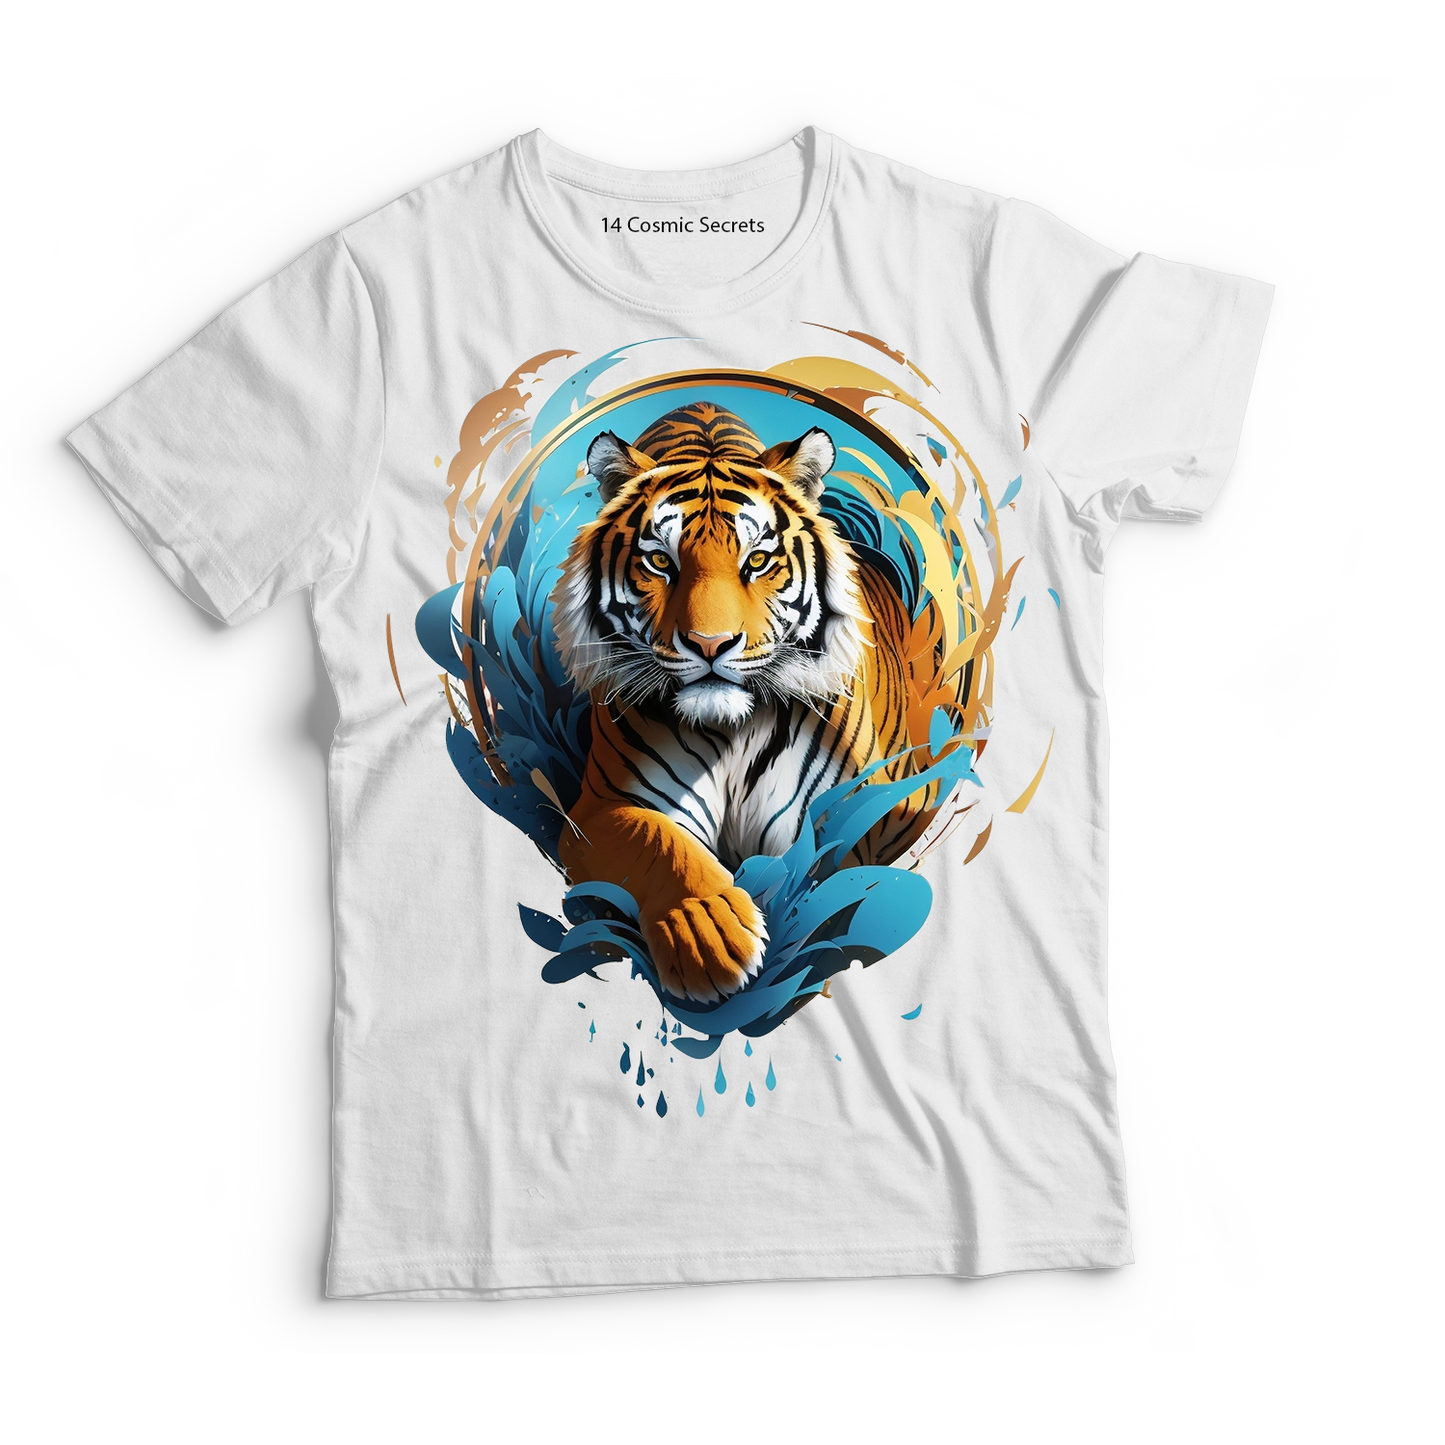 Royal Bengal Majesty Tee Graphic Printed T-Shirt  Cotton T-Shirt Magnificence of India T-Shirt